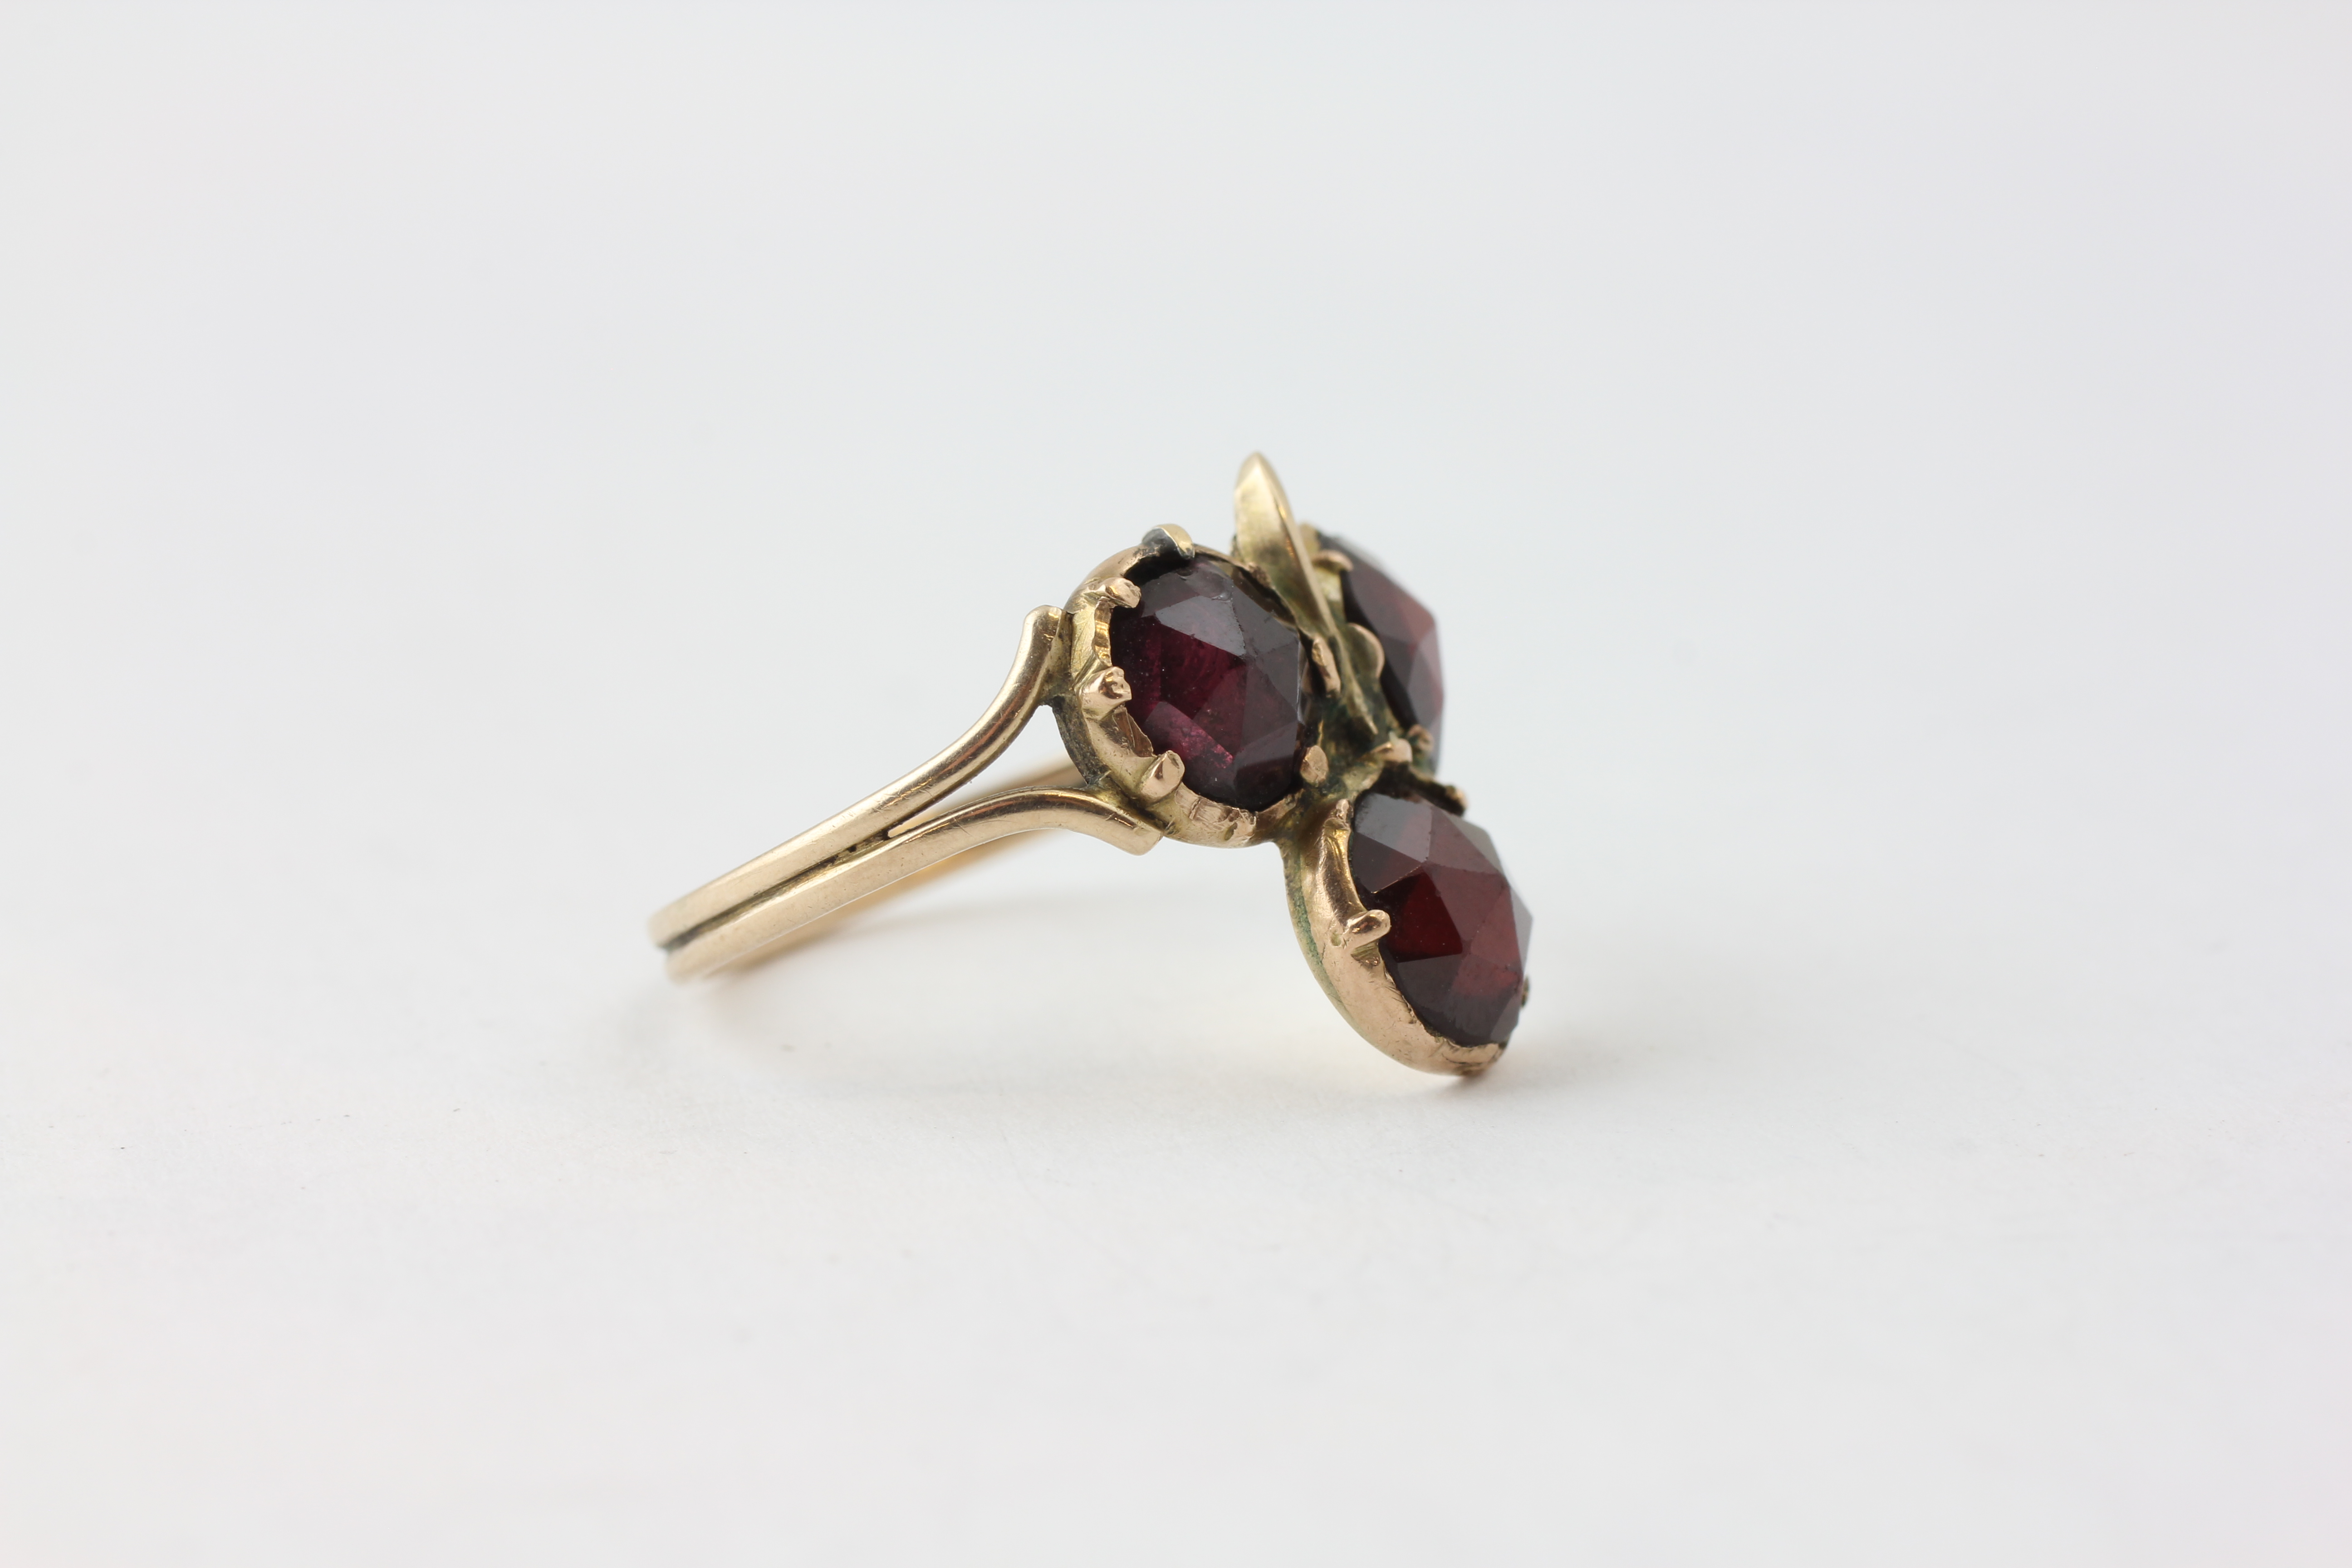 A THREE STONE AMETHYST RING OF CLOVER LEAF DESIGN, SET IN UNMARKED YELLOW METAL, - Image 2 of 5